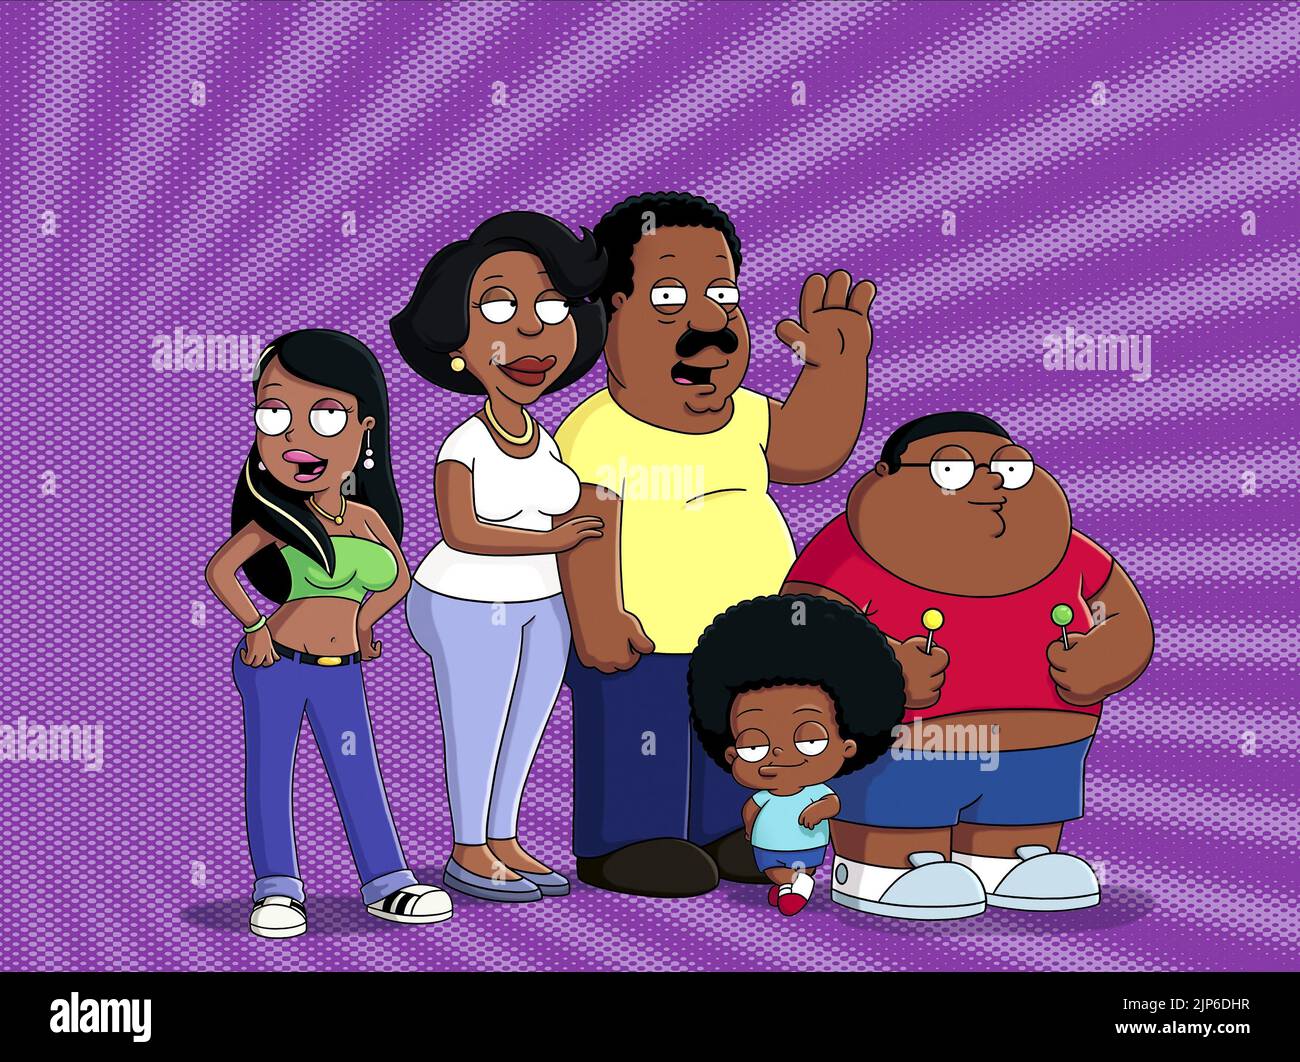 TUBS,TUBS,BROWN,TUBBS,JR., THE CLEVELAND SHOW, 2009 Foto Stock